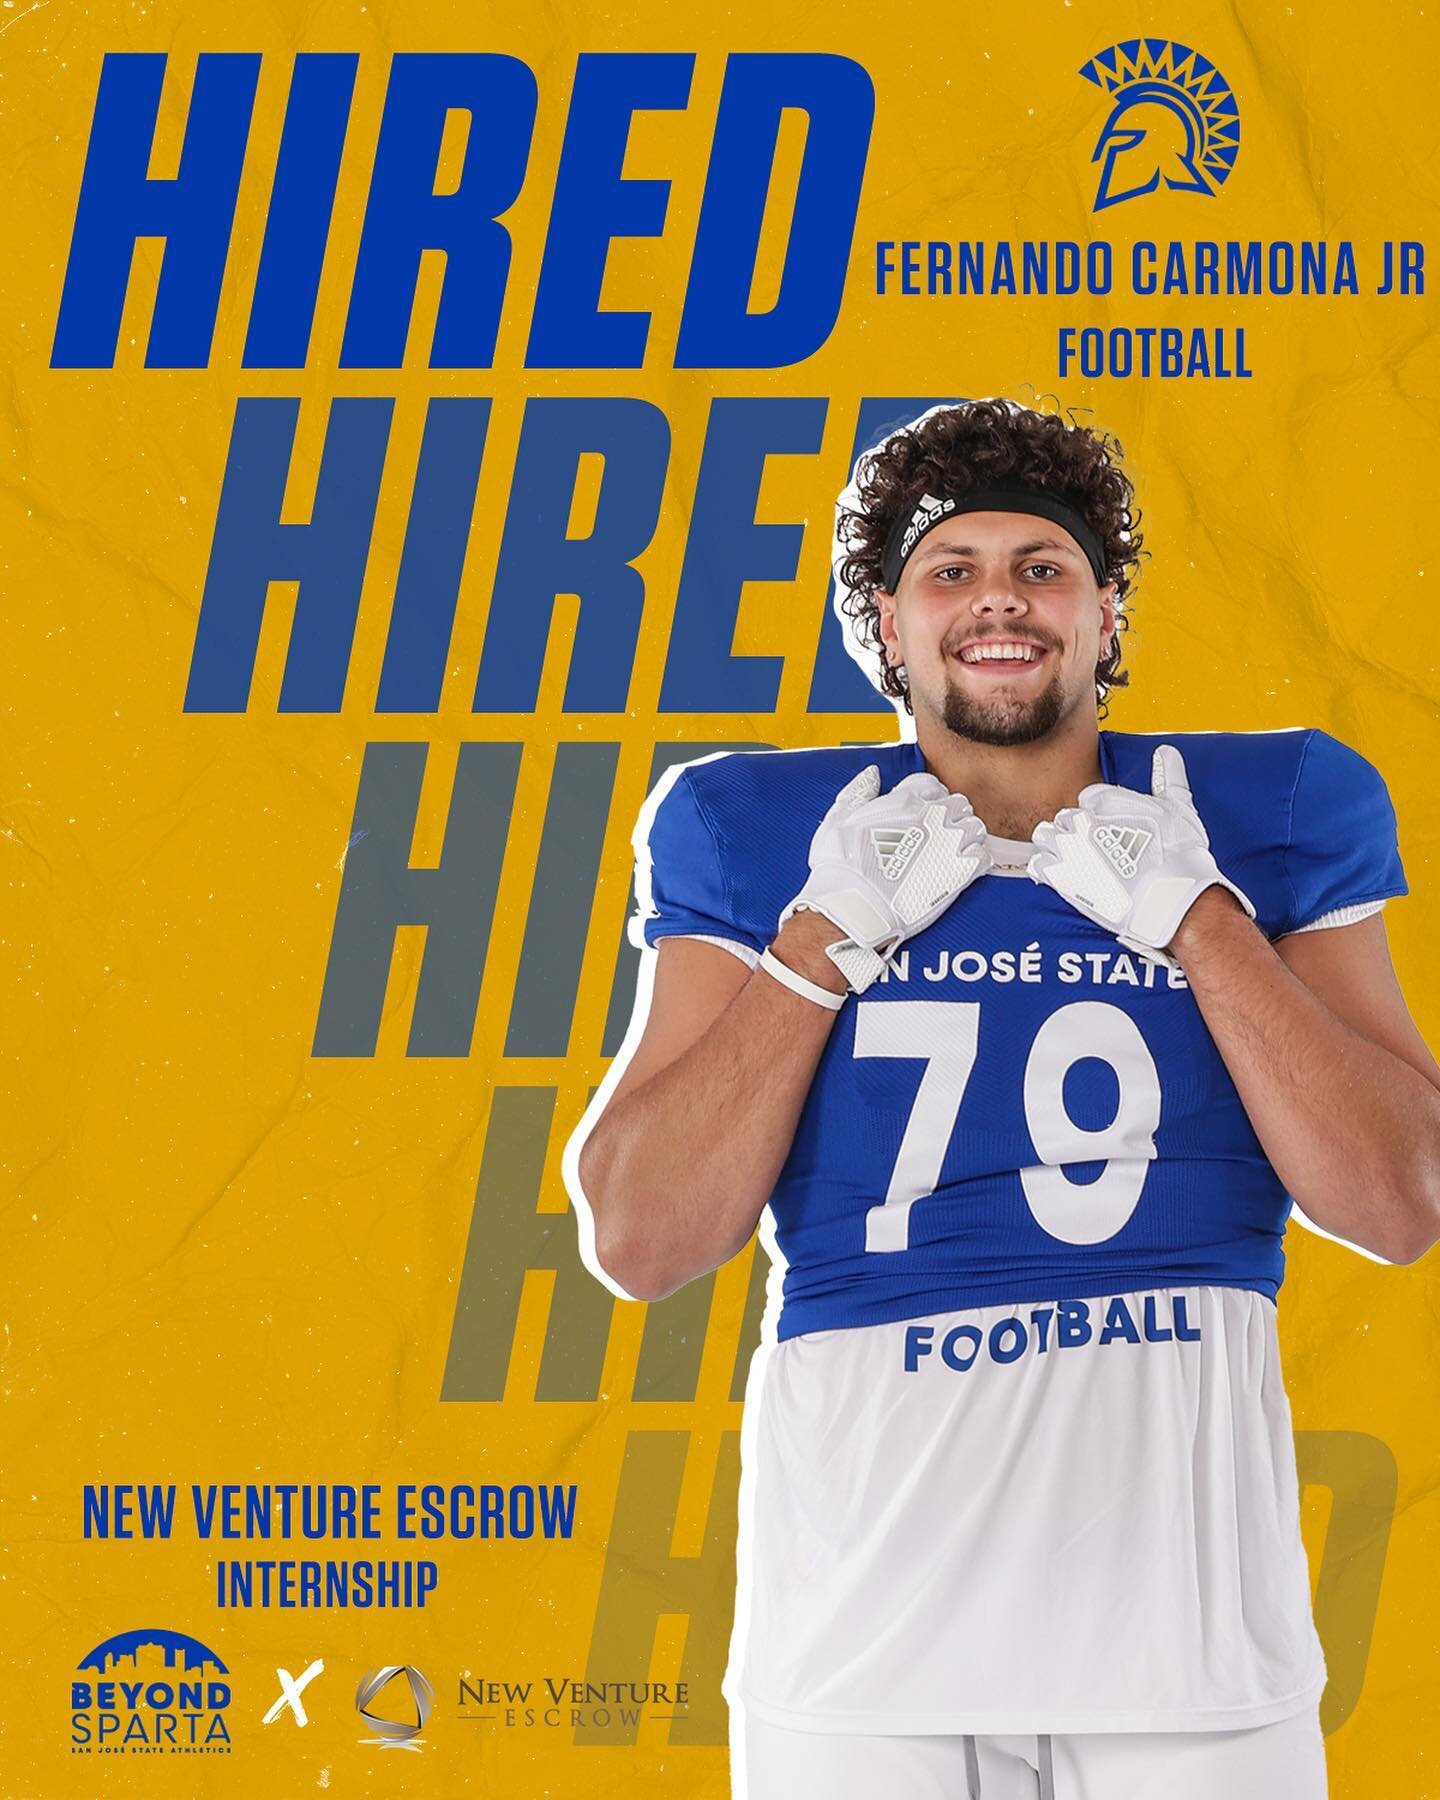 It&rsquo;s Internship season!⚔️
Celebrating our athletes who are Creating A Championship Life 

First up - Chevan Cordeiro and Fernando Carmona Jr. With New Venture Escrow @new.venture.escrow 

#BeyondSparta | #SpartanUp